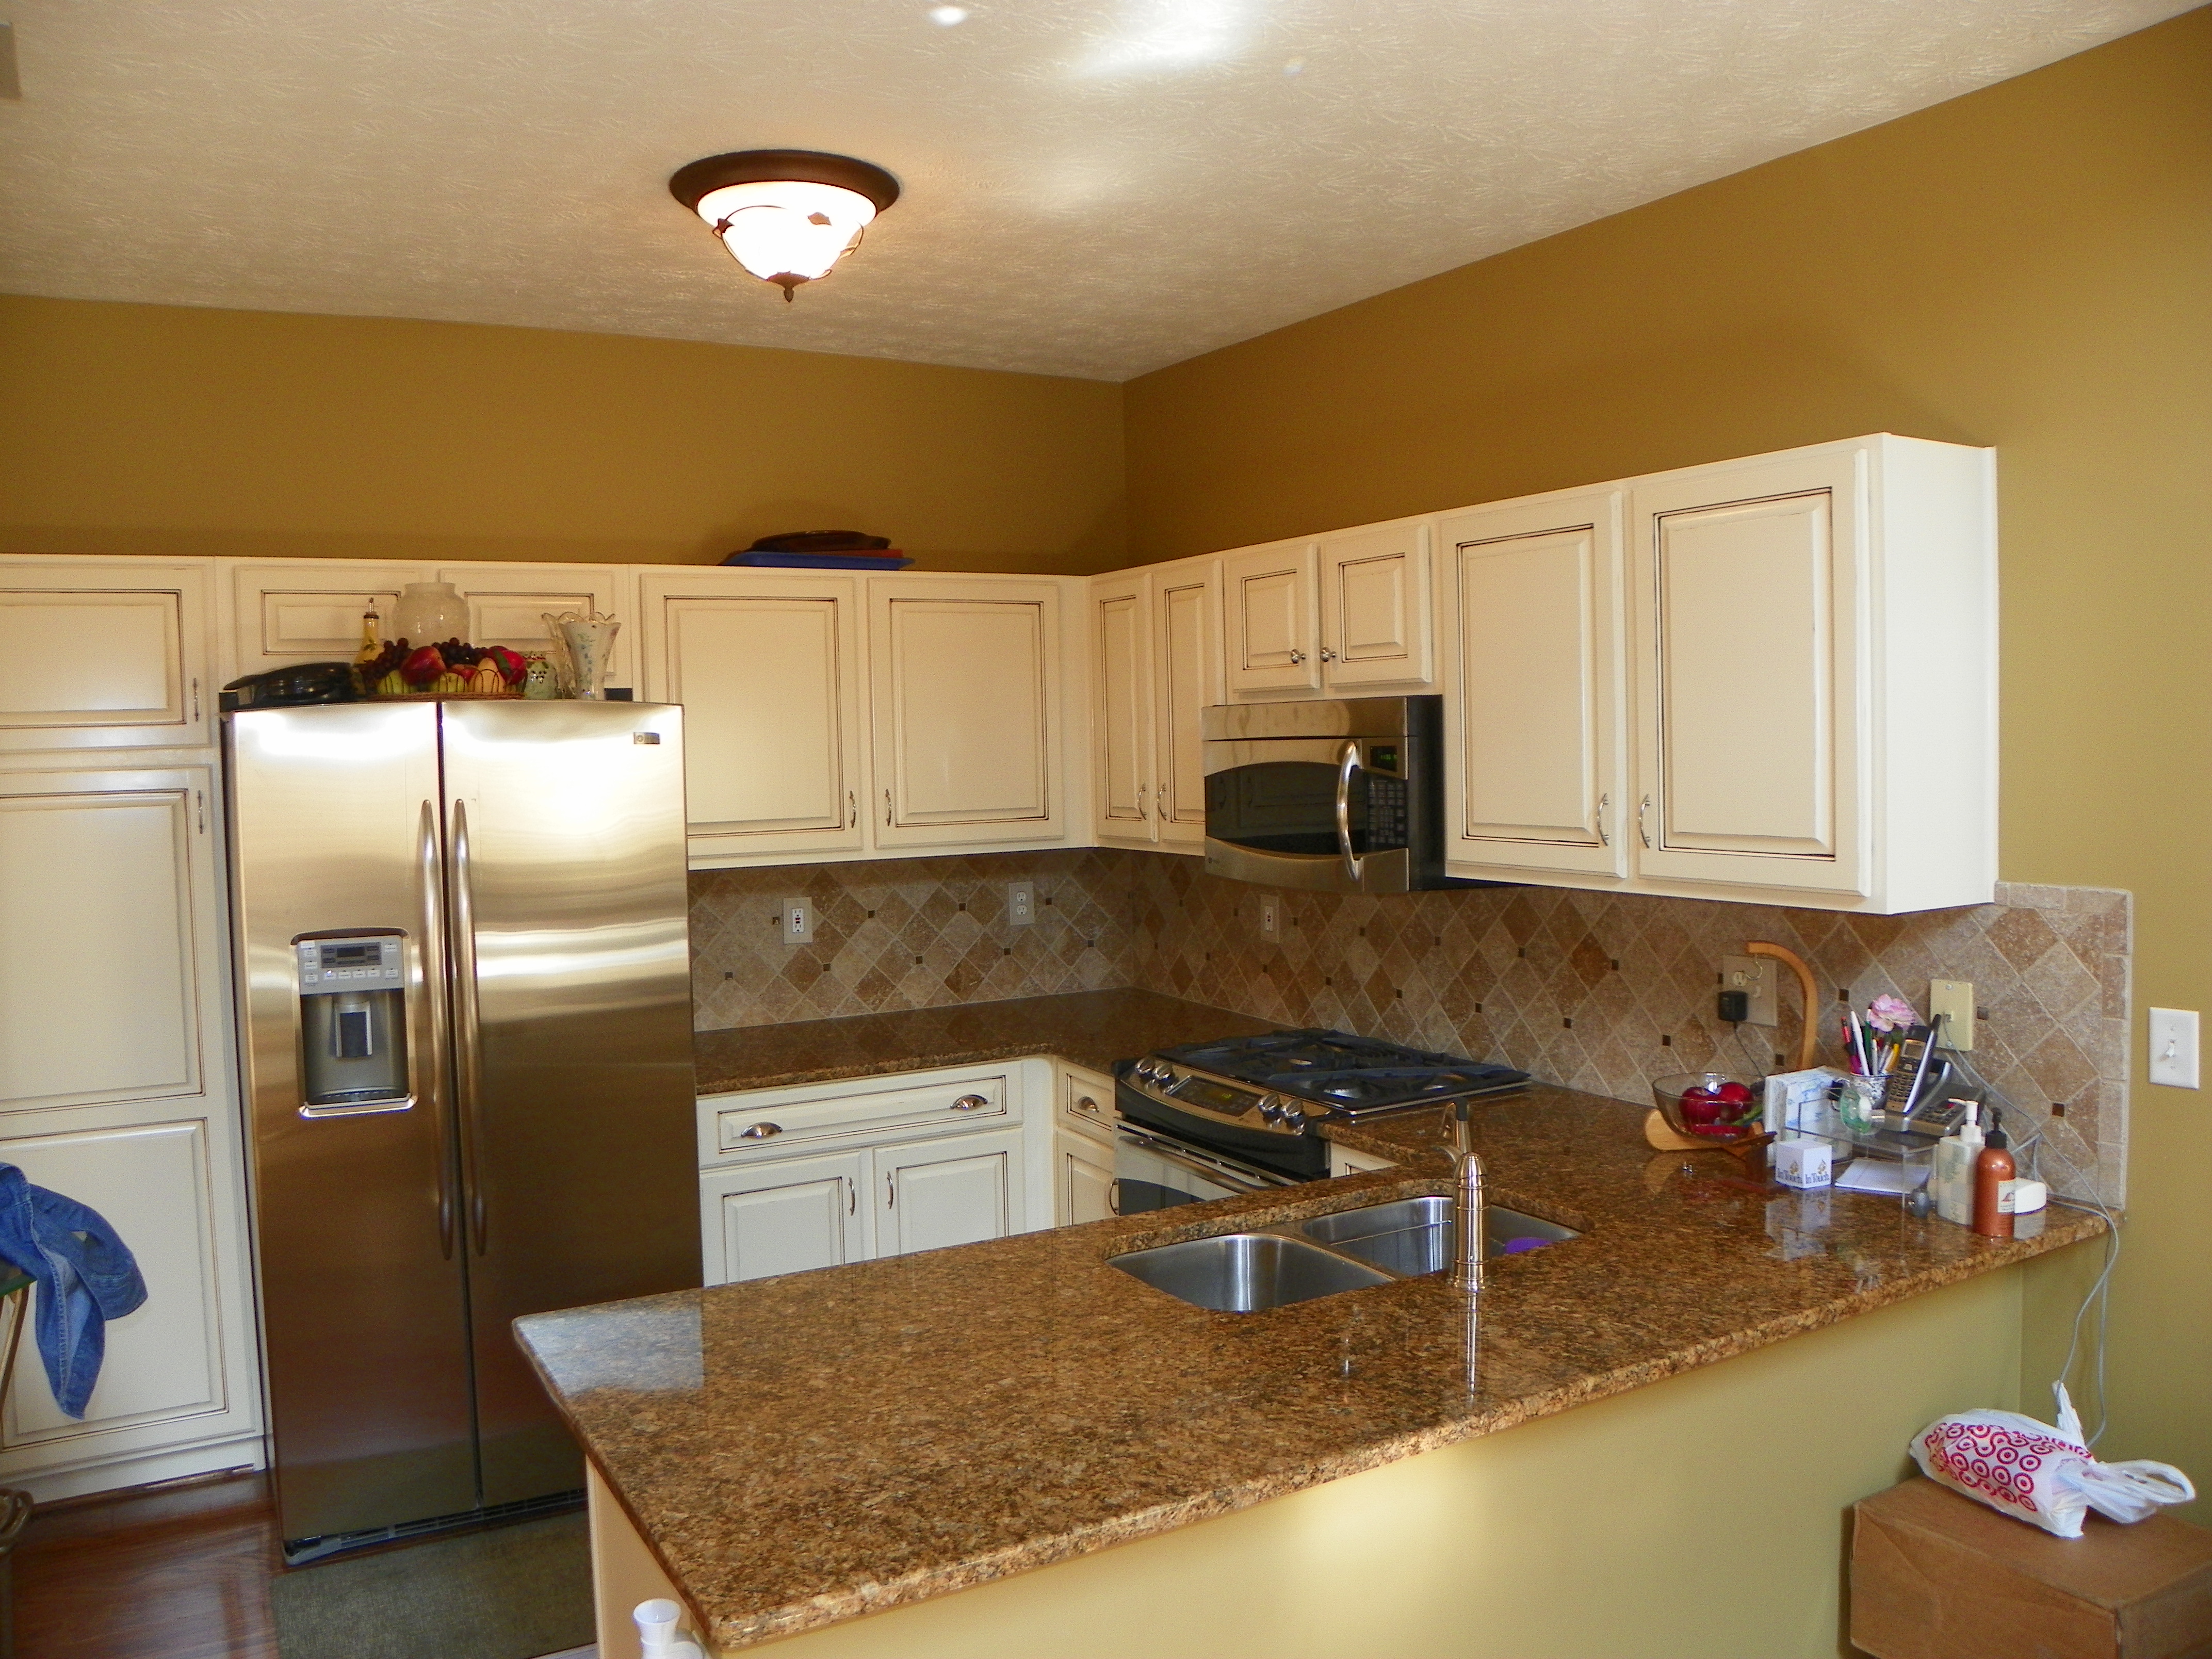 Kitchen Remodel with appliances, granite and more.